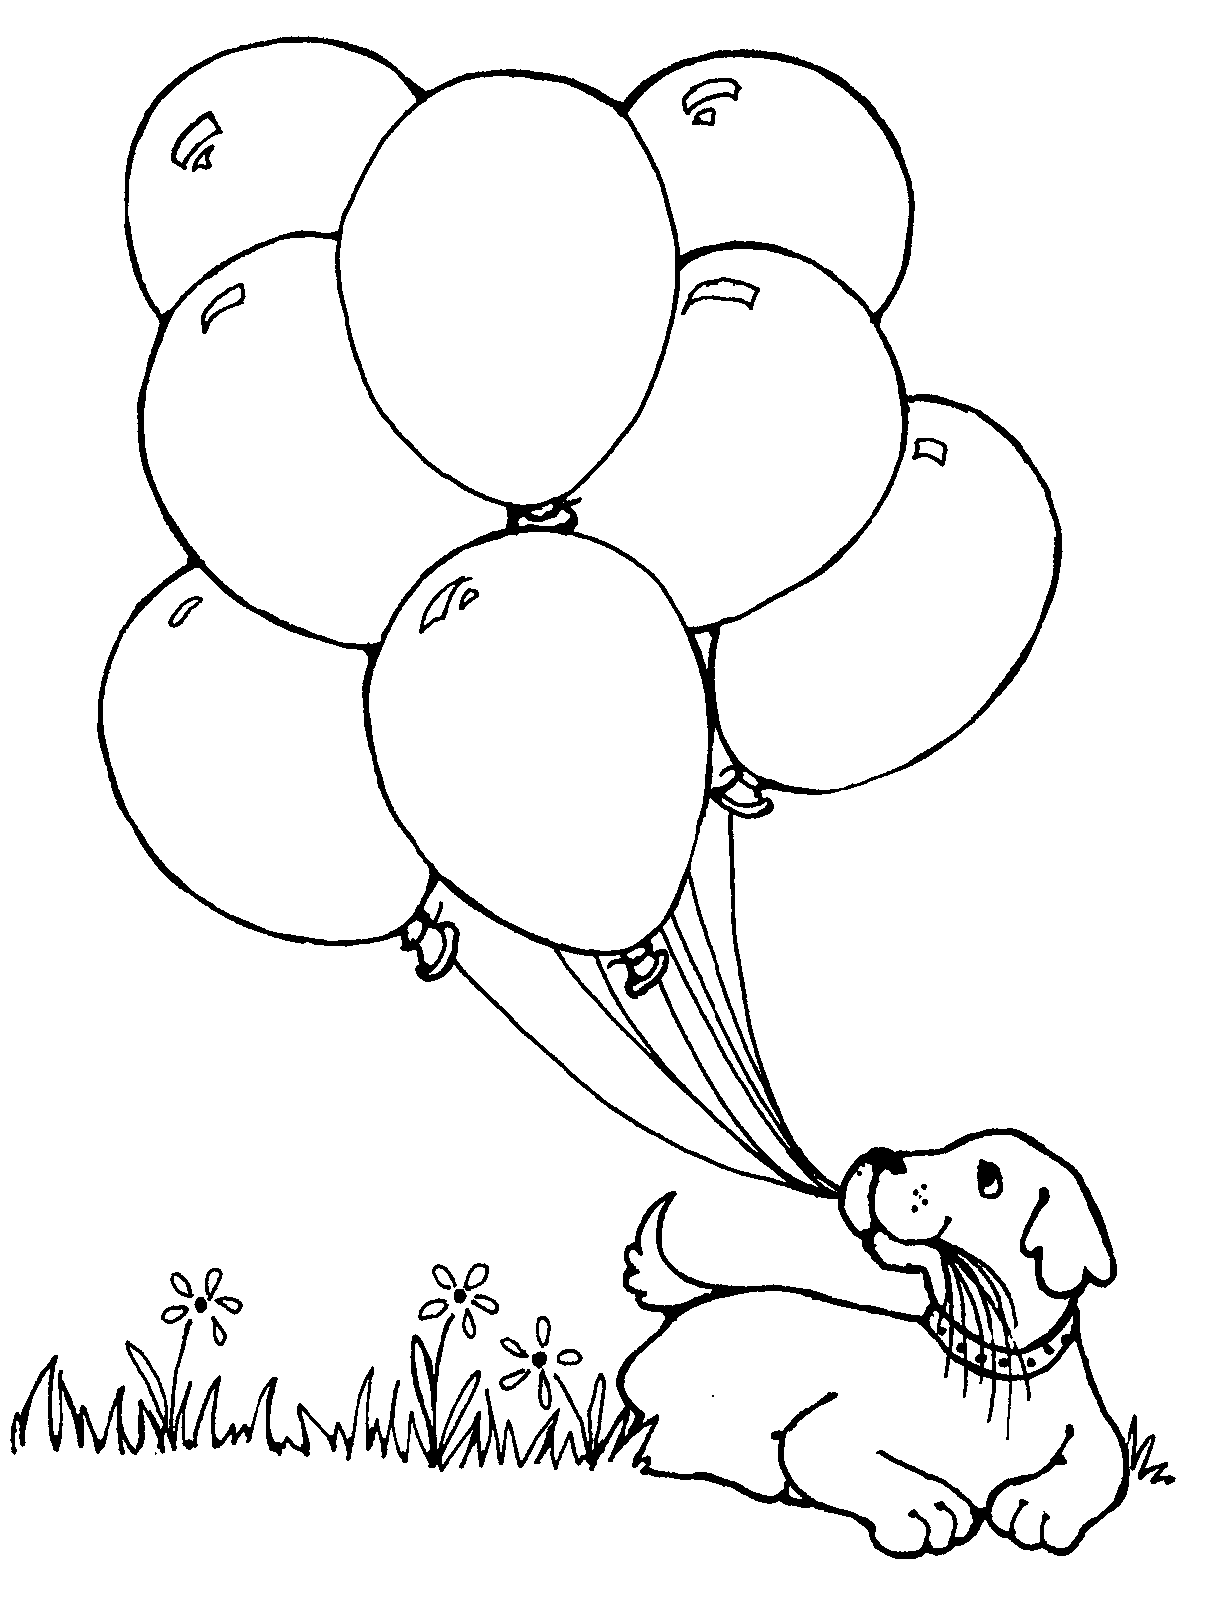 Owl with balloon clipart free black and white